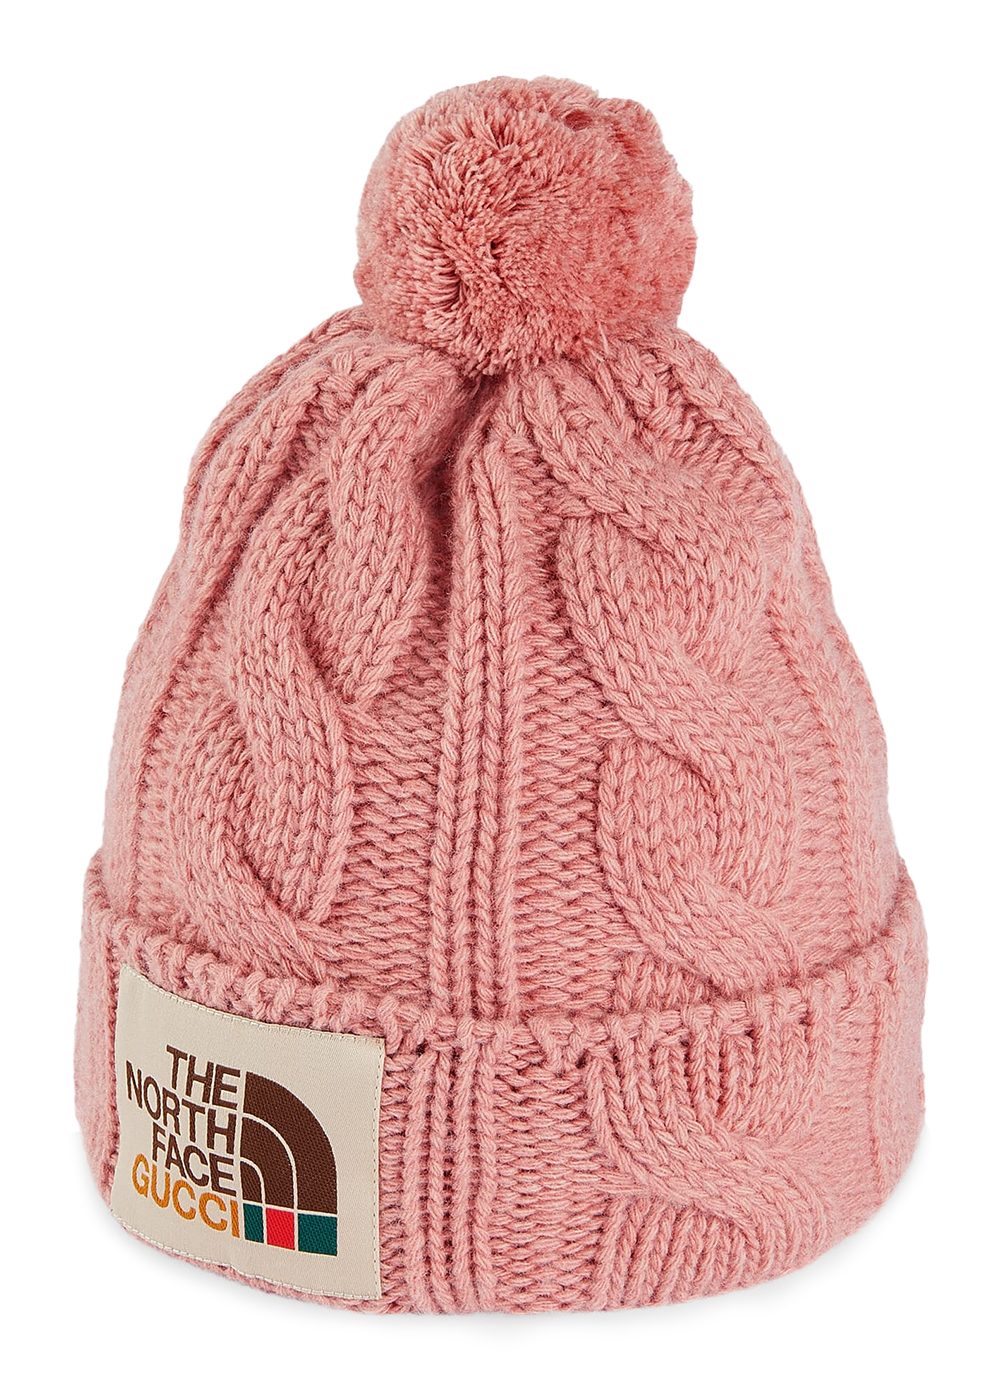 Gucci x The North Face Wool Hat Pink